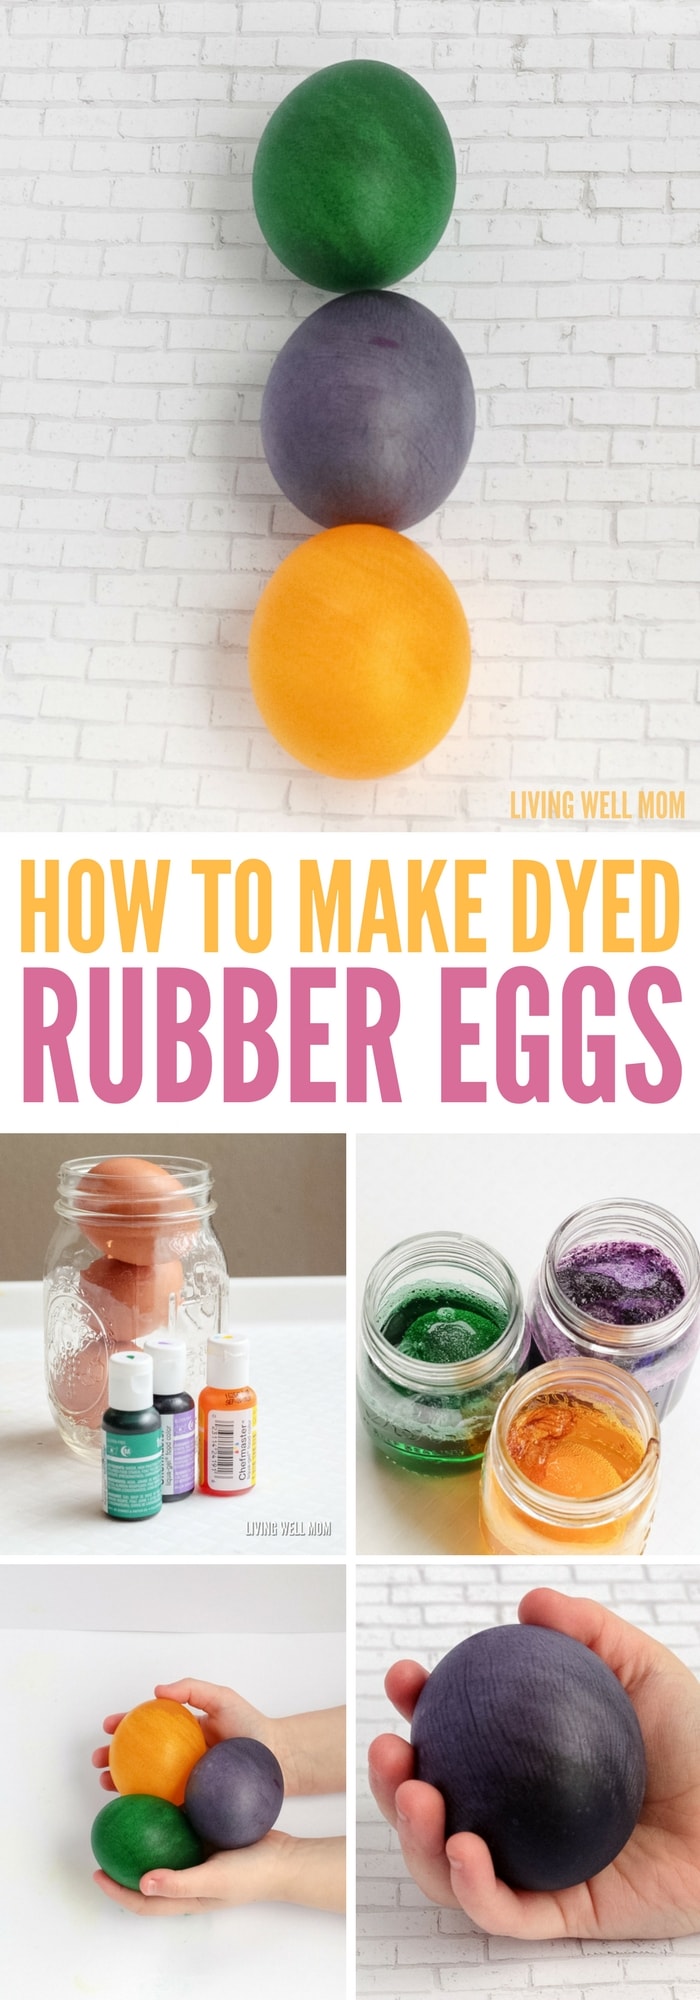 Transform your kitchen into a science lab with these colorful dyed rubber eggs! Whether for a fun twist on dyed Easter eggs or a science experiment, you won’t believe how easy it is!